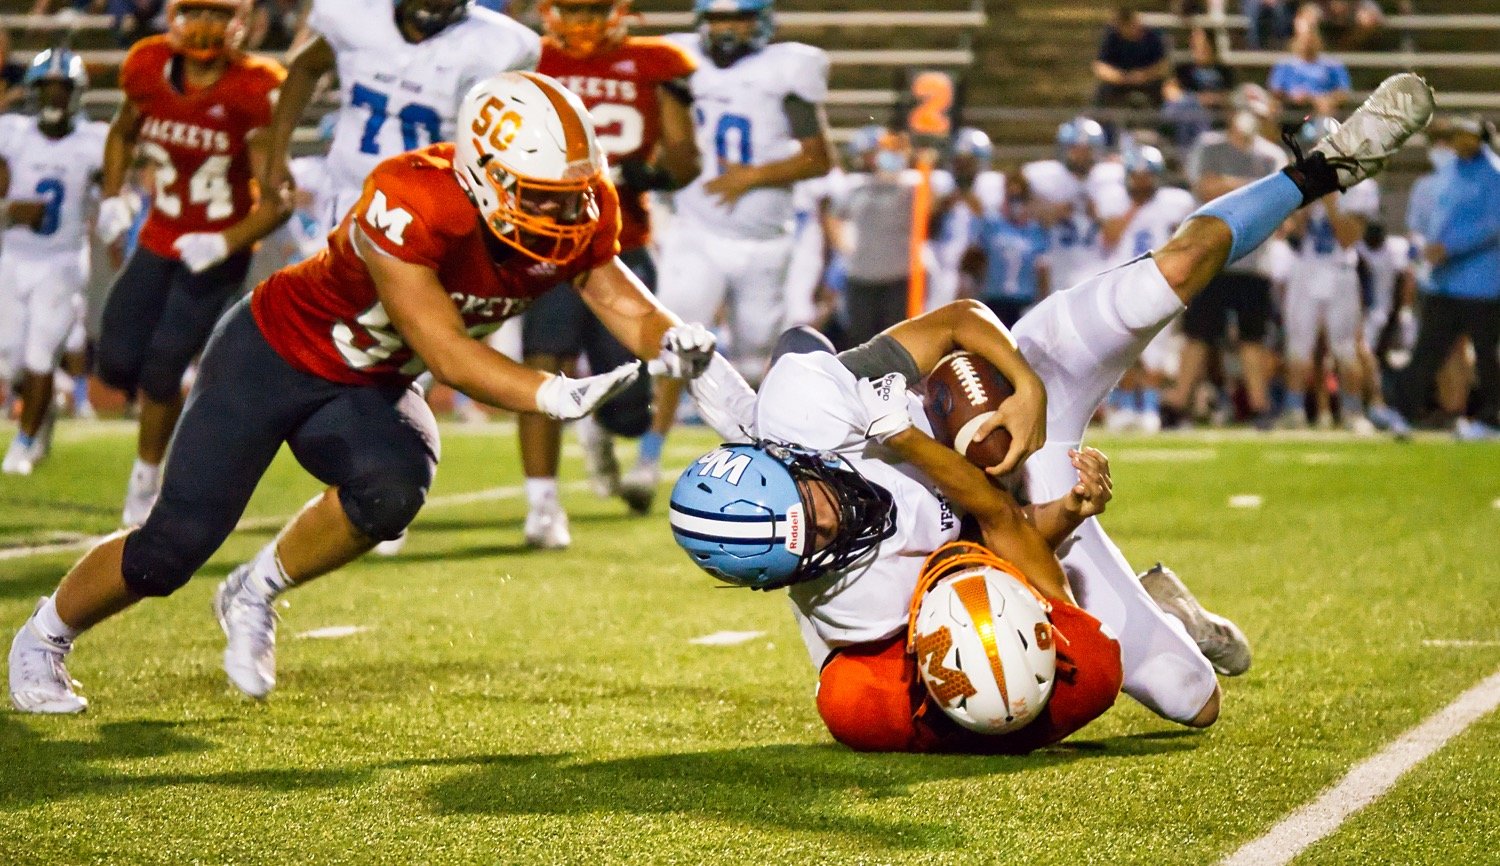 Drew Robertson comes up with a backfield tackle for the Mineola defense Friday.